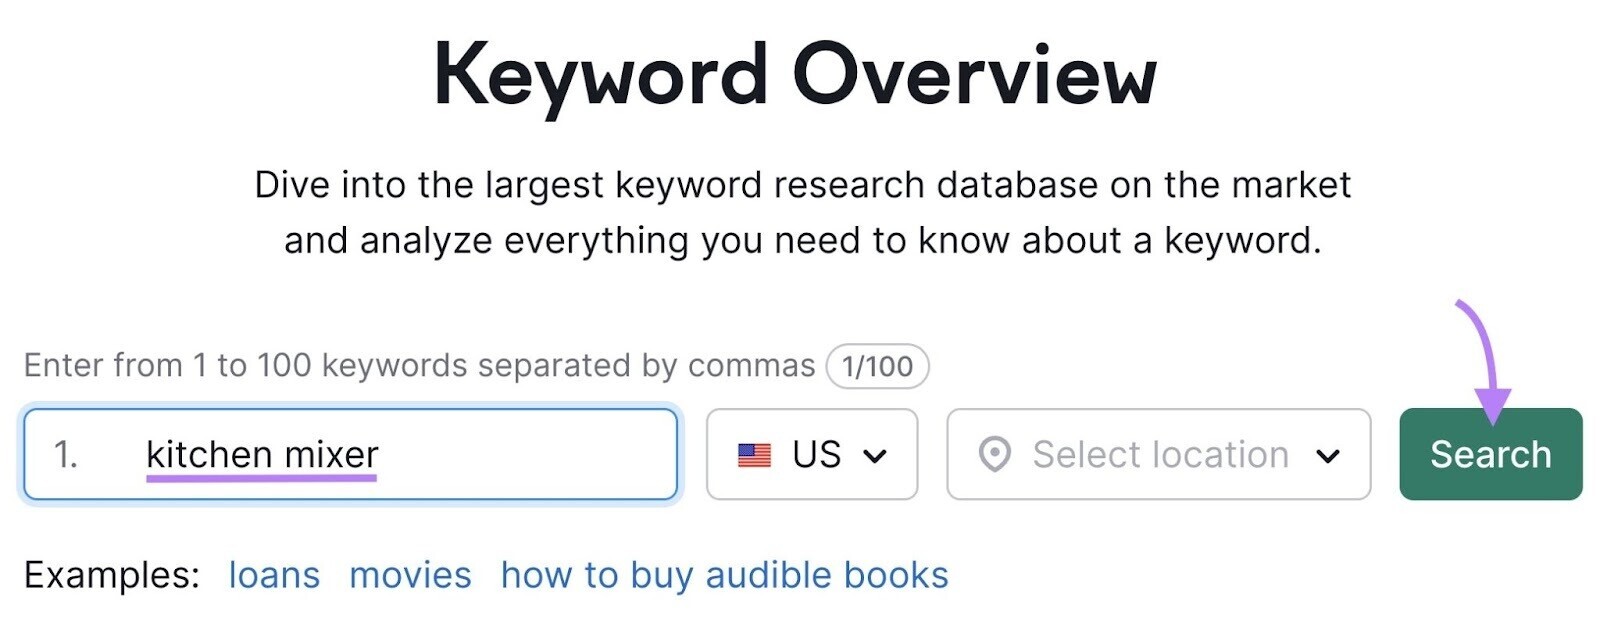 search for "kitchen mixer" in Keyword Overview tool